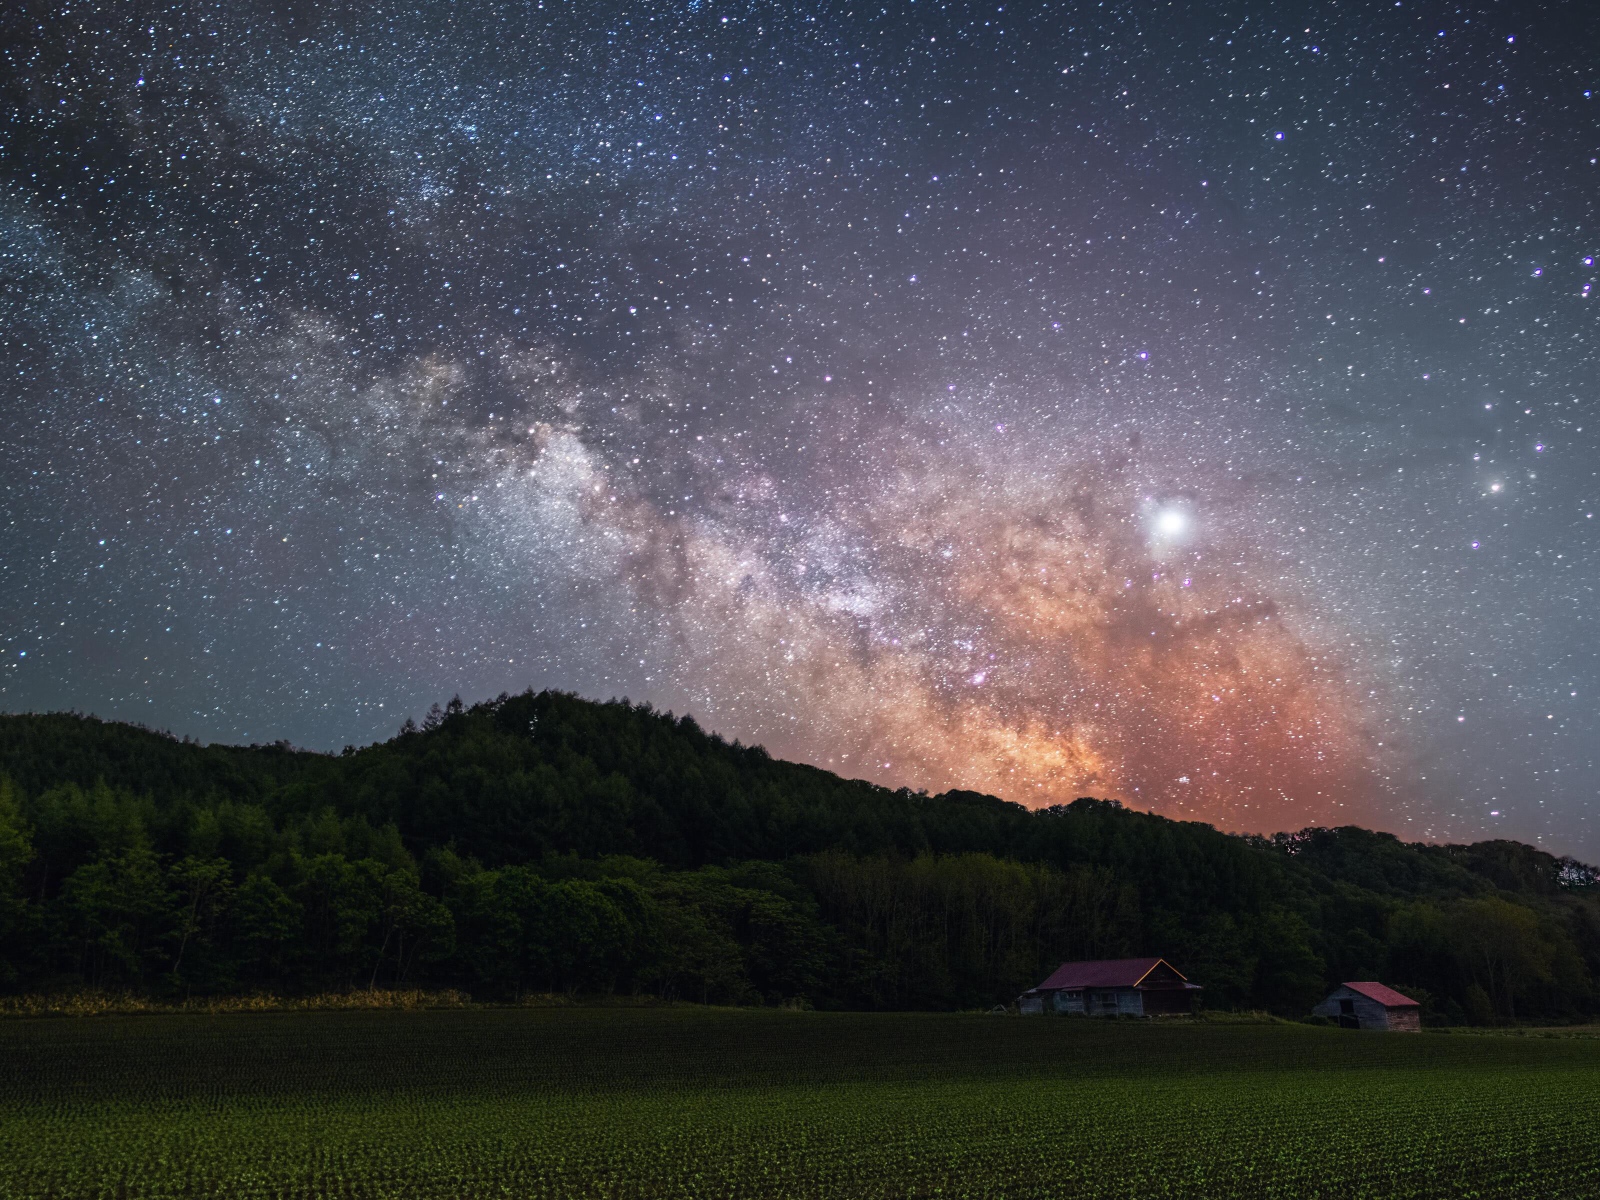 Milky Way in the starry sky above the green forest